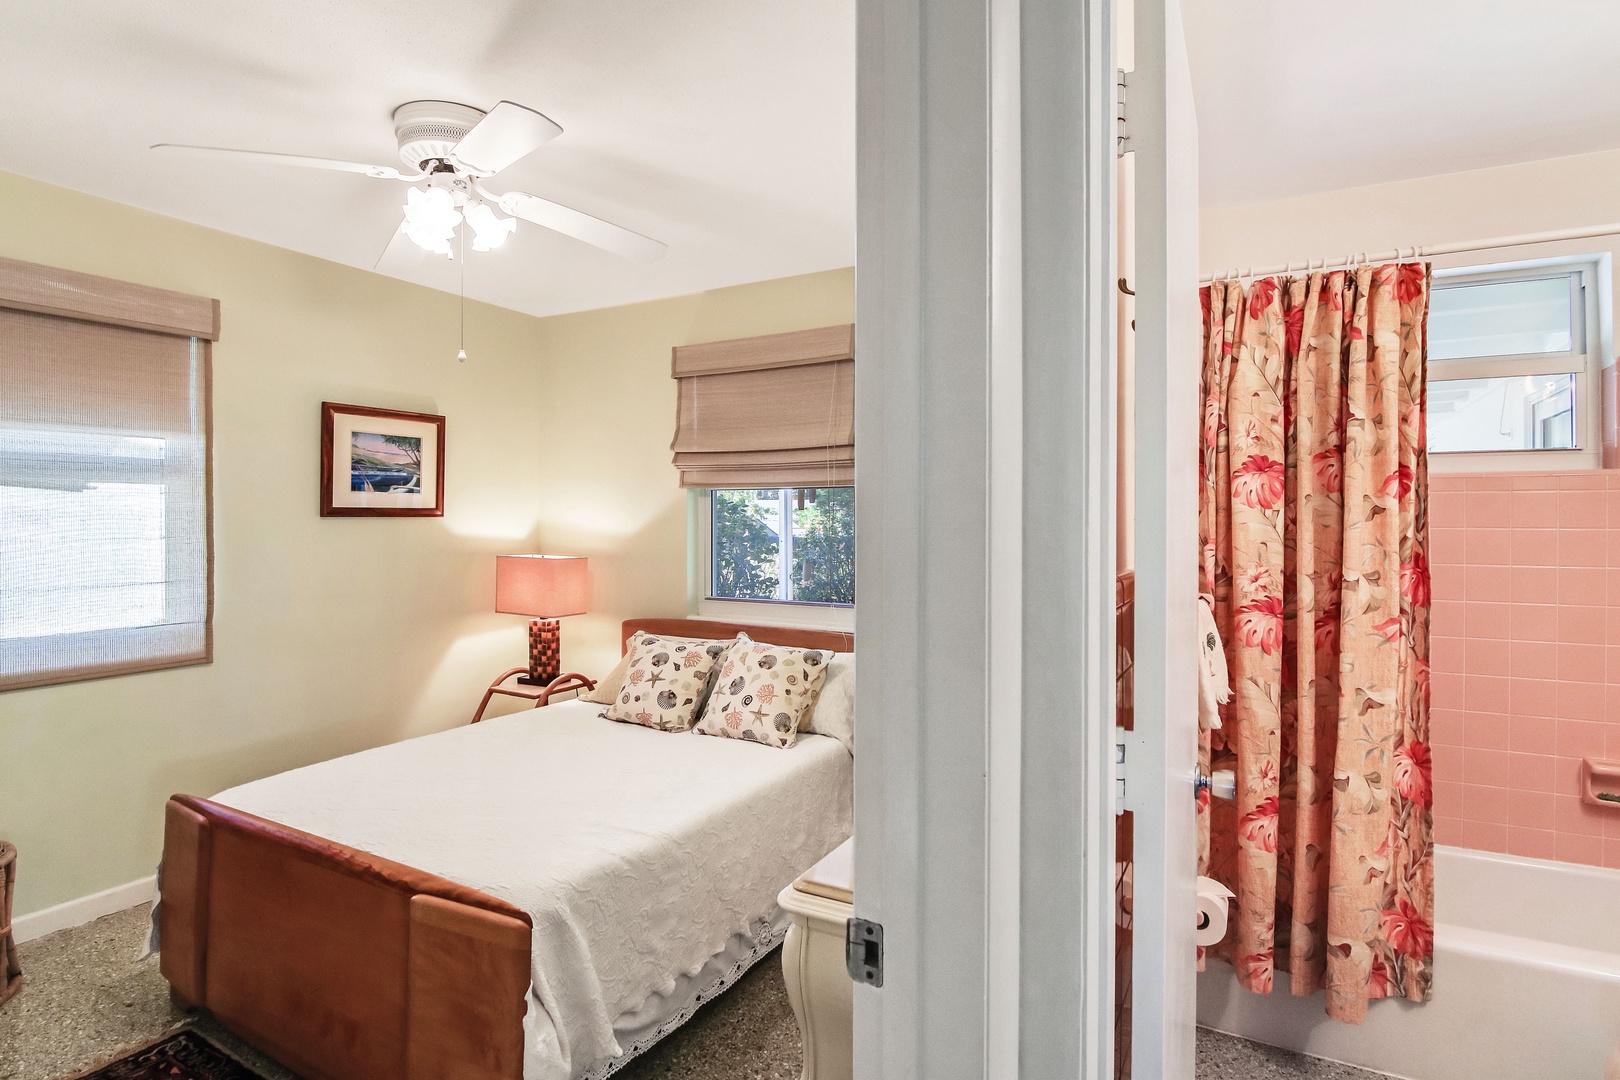 The first of two additional bedrooms, showcasing a plush queen-sized bed